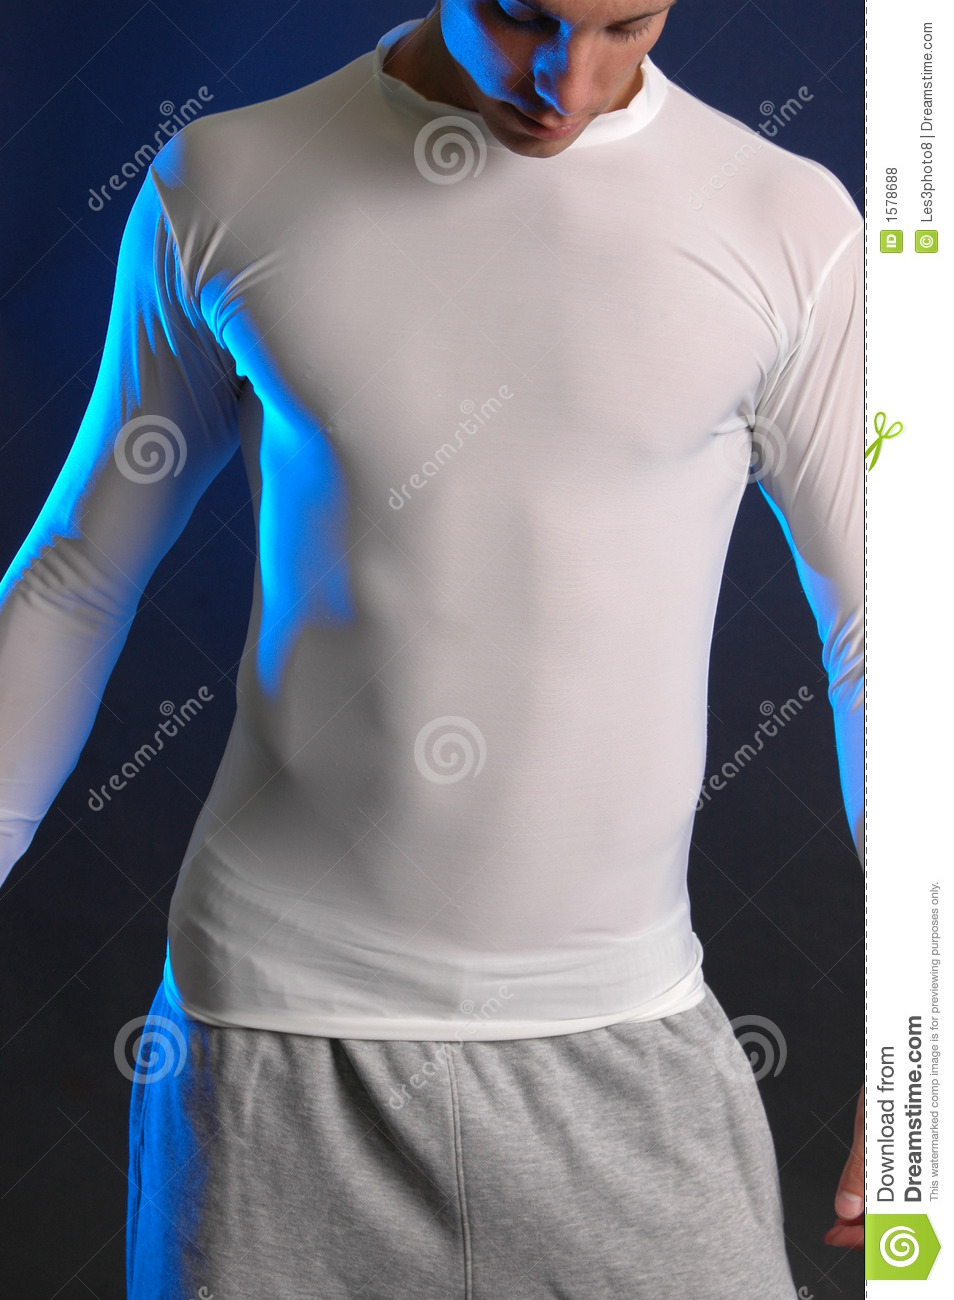 Male Model With Great Abs In A Tight White Shirt He S In Sweat Pants